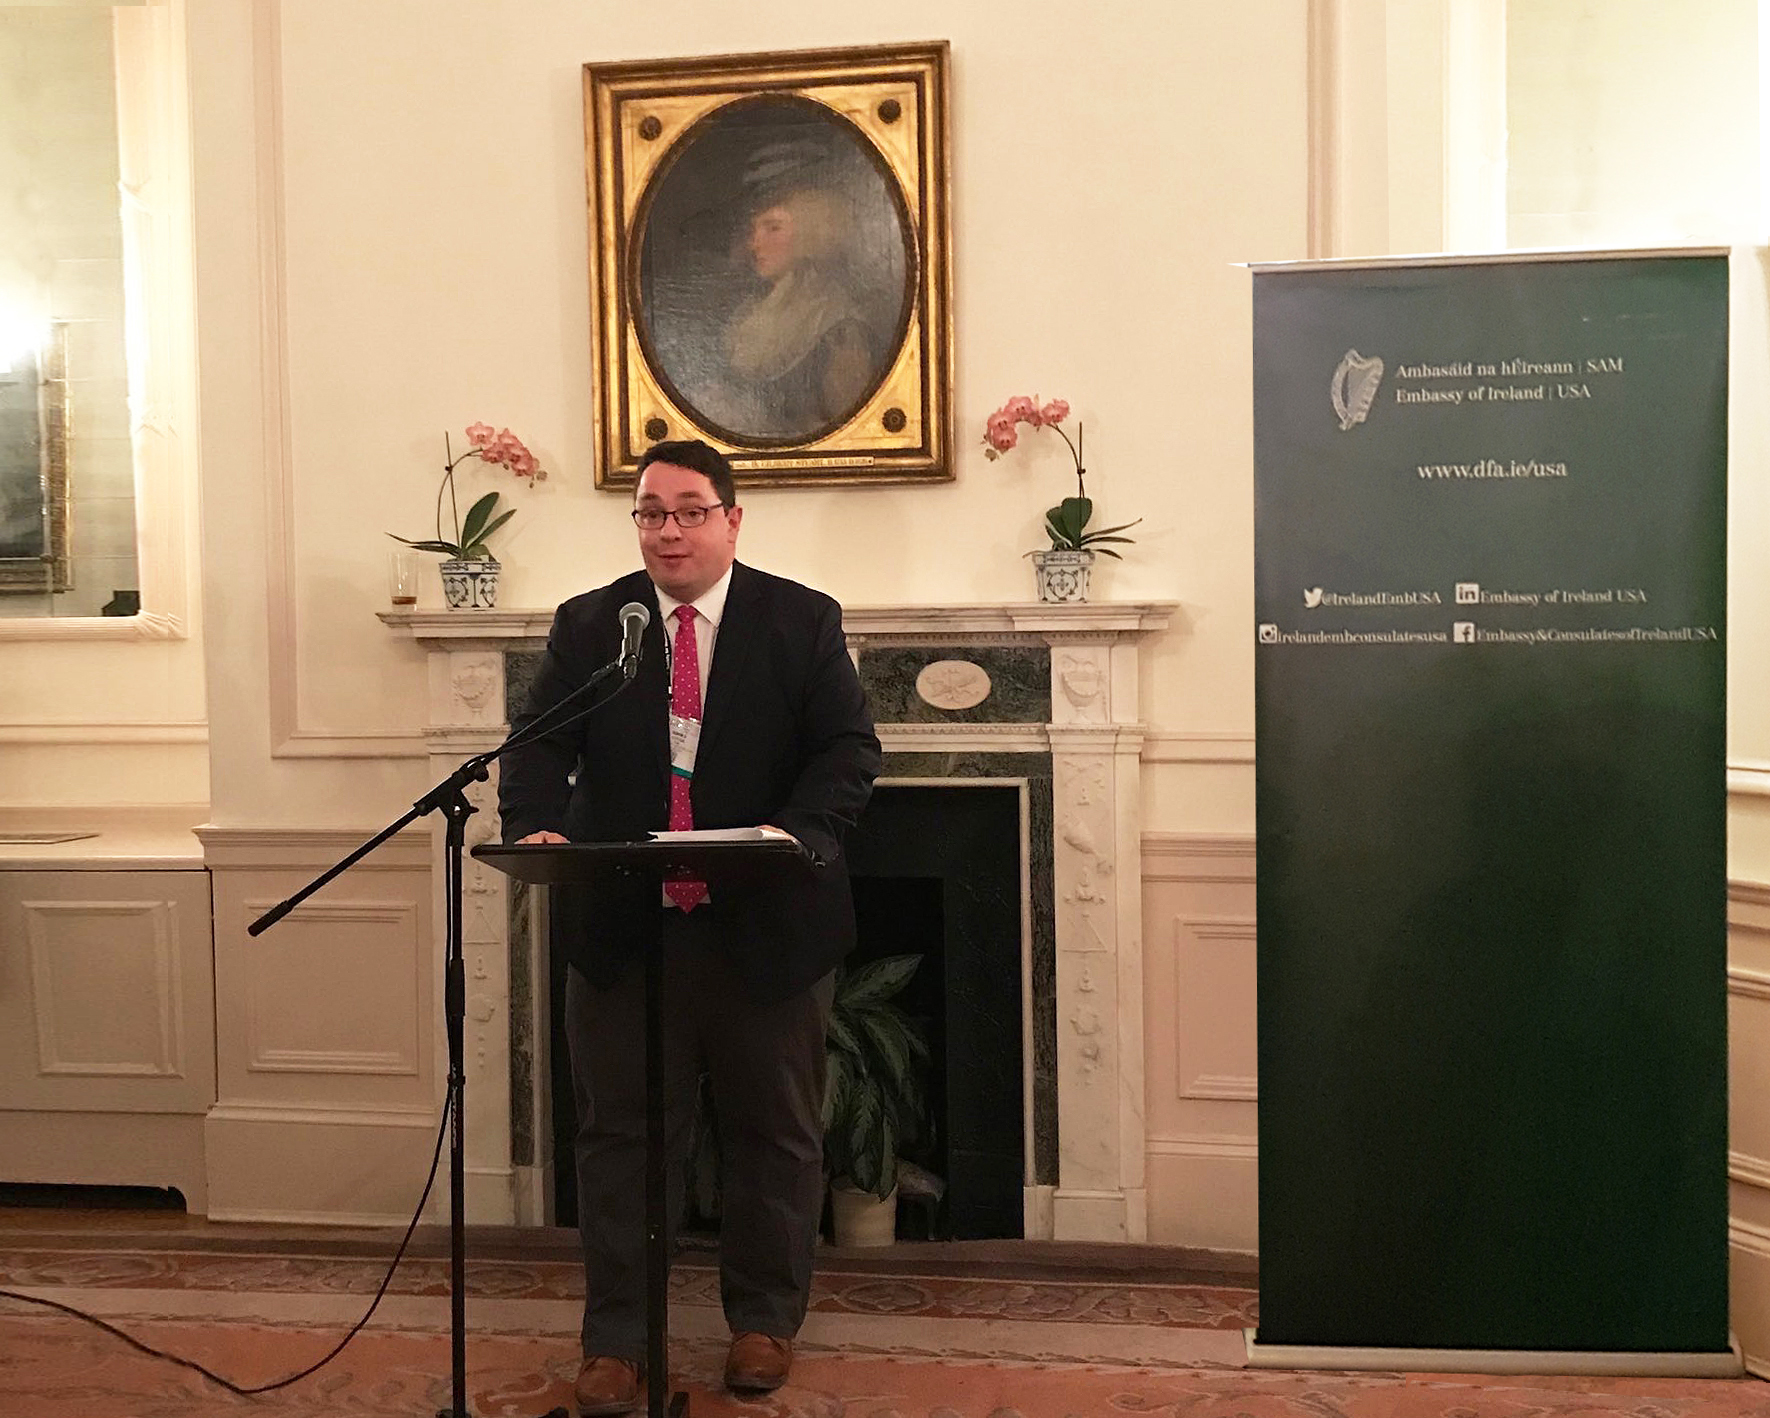 Cork Neuroscientists hosted at the Embassy of Ireland USA